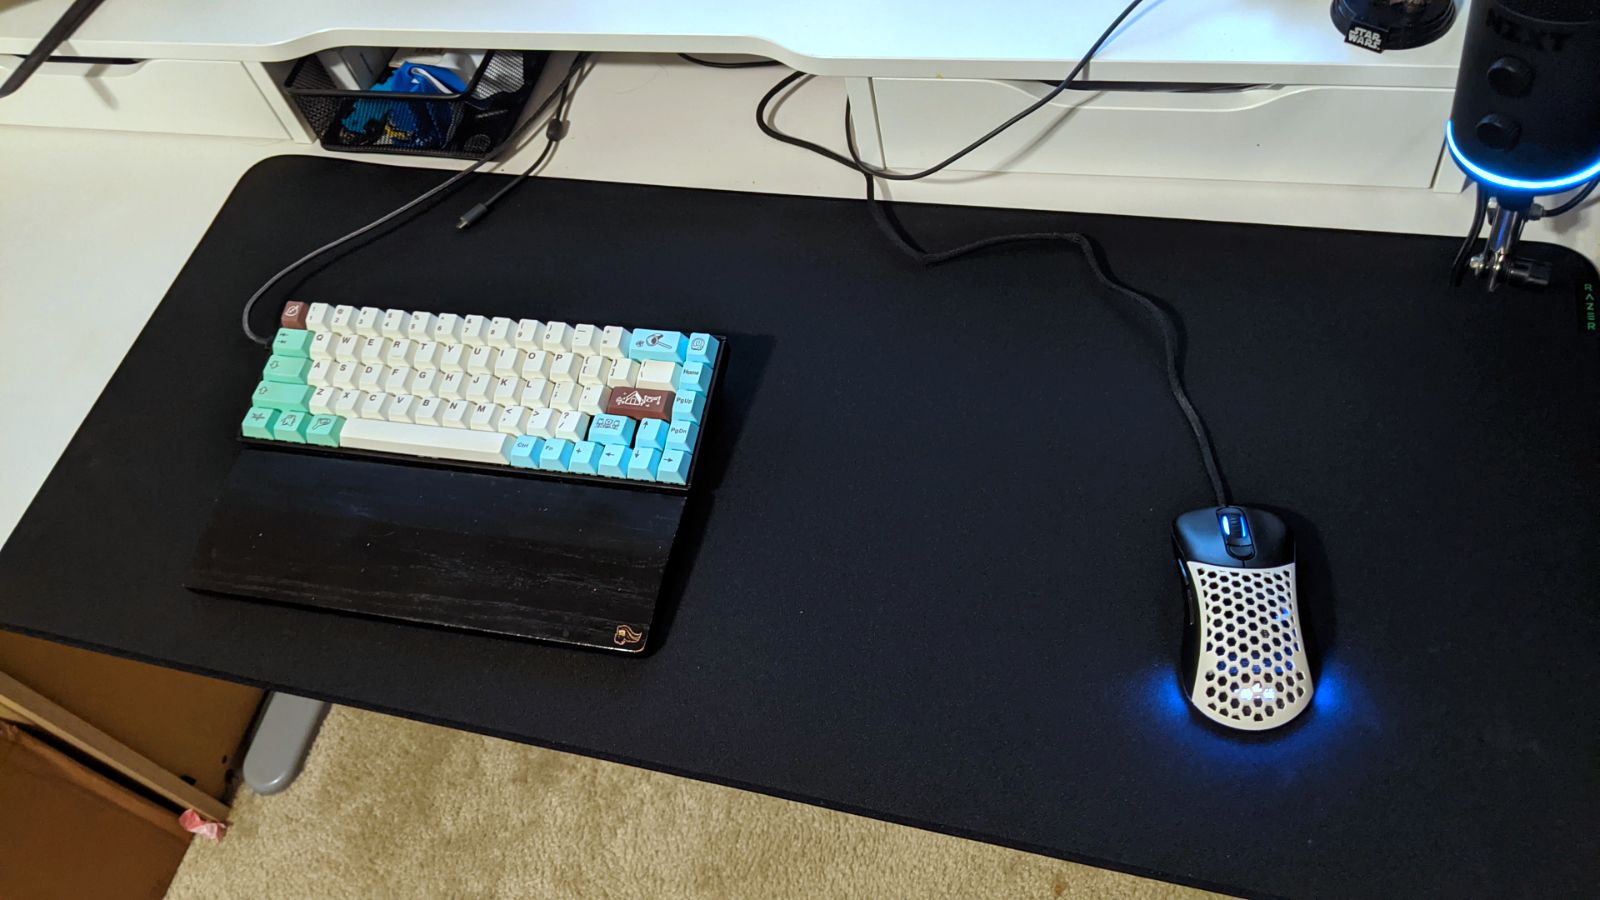 The XXL black Razor Strider mousepad on a desk with a keyboard and mouse.